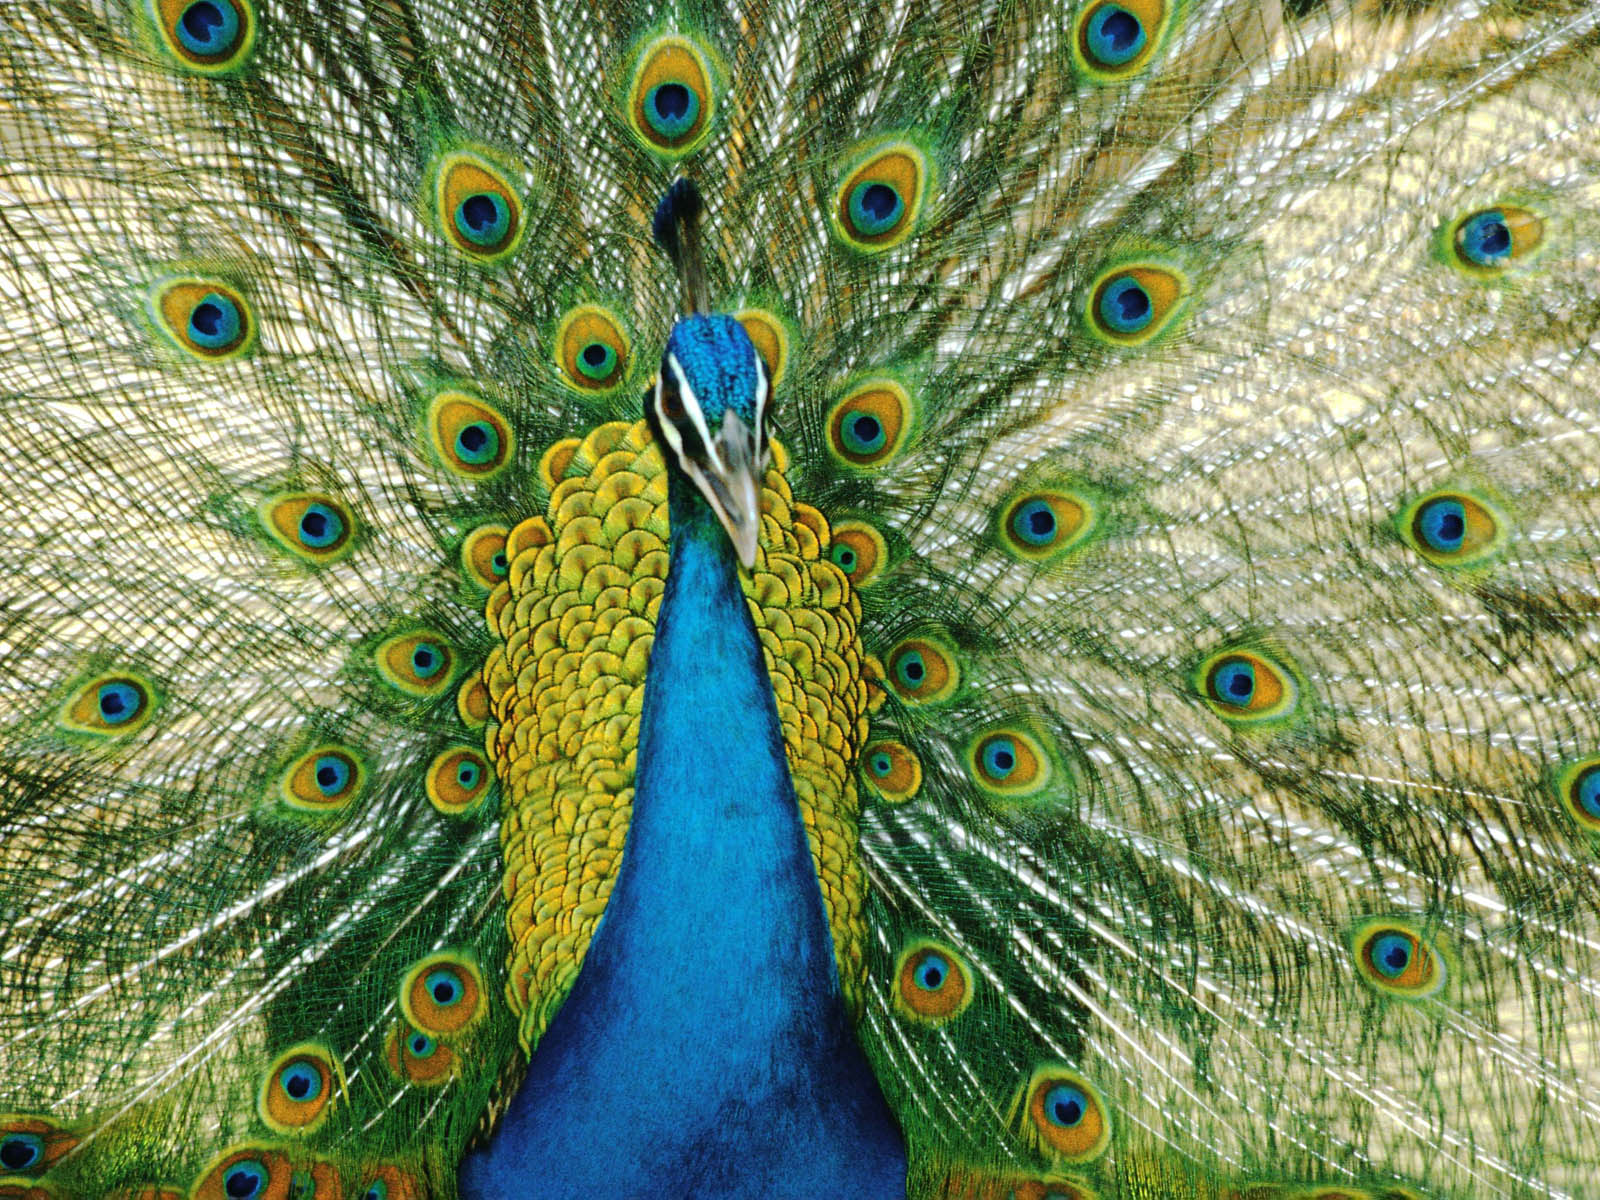 Tag Peacock Wallpapers Backgrounds PhotosImages and Pictures for